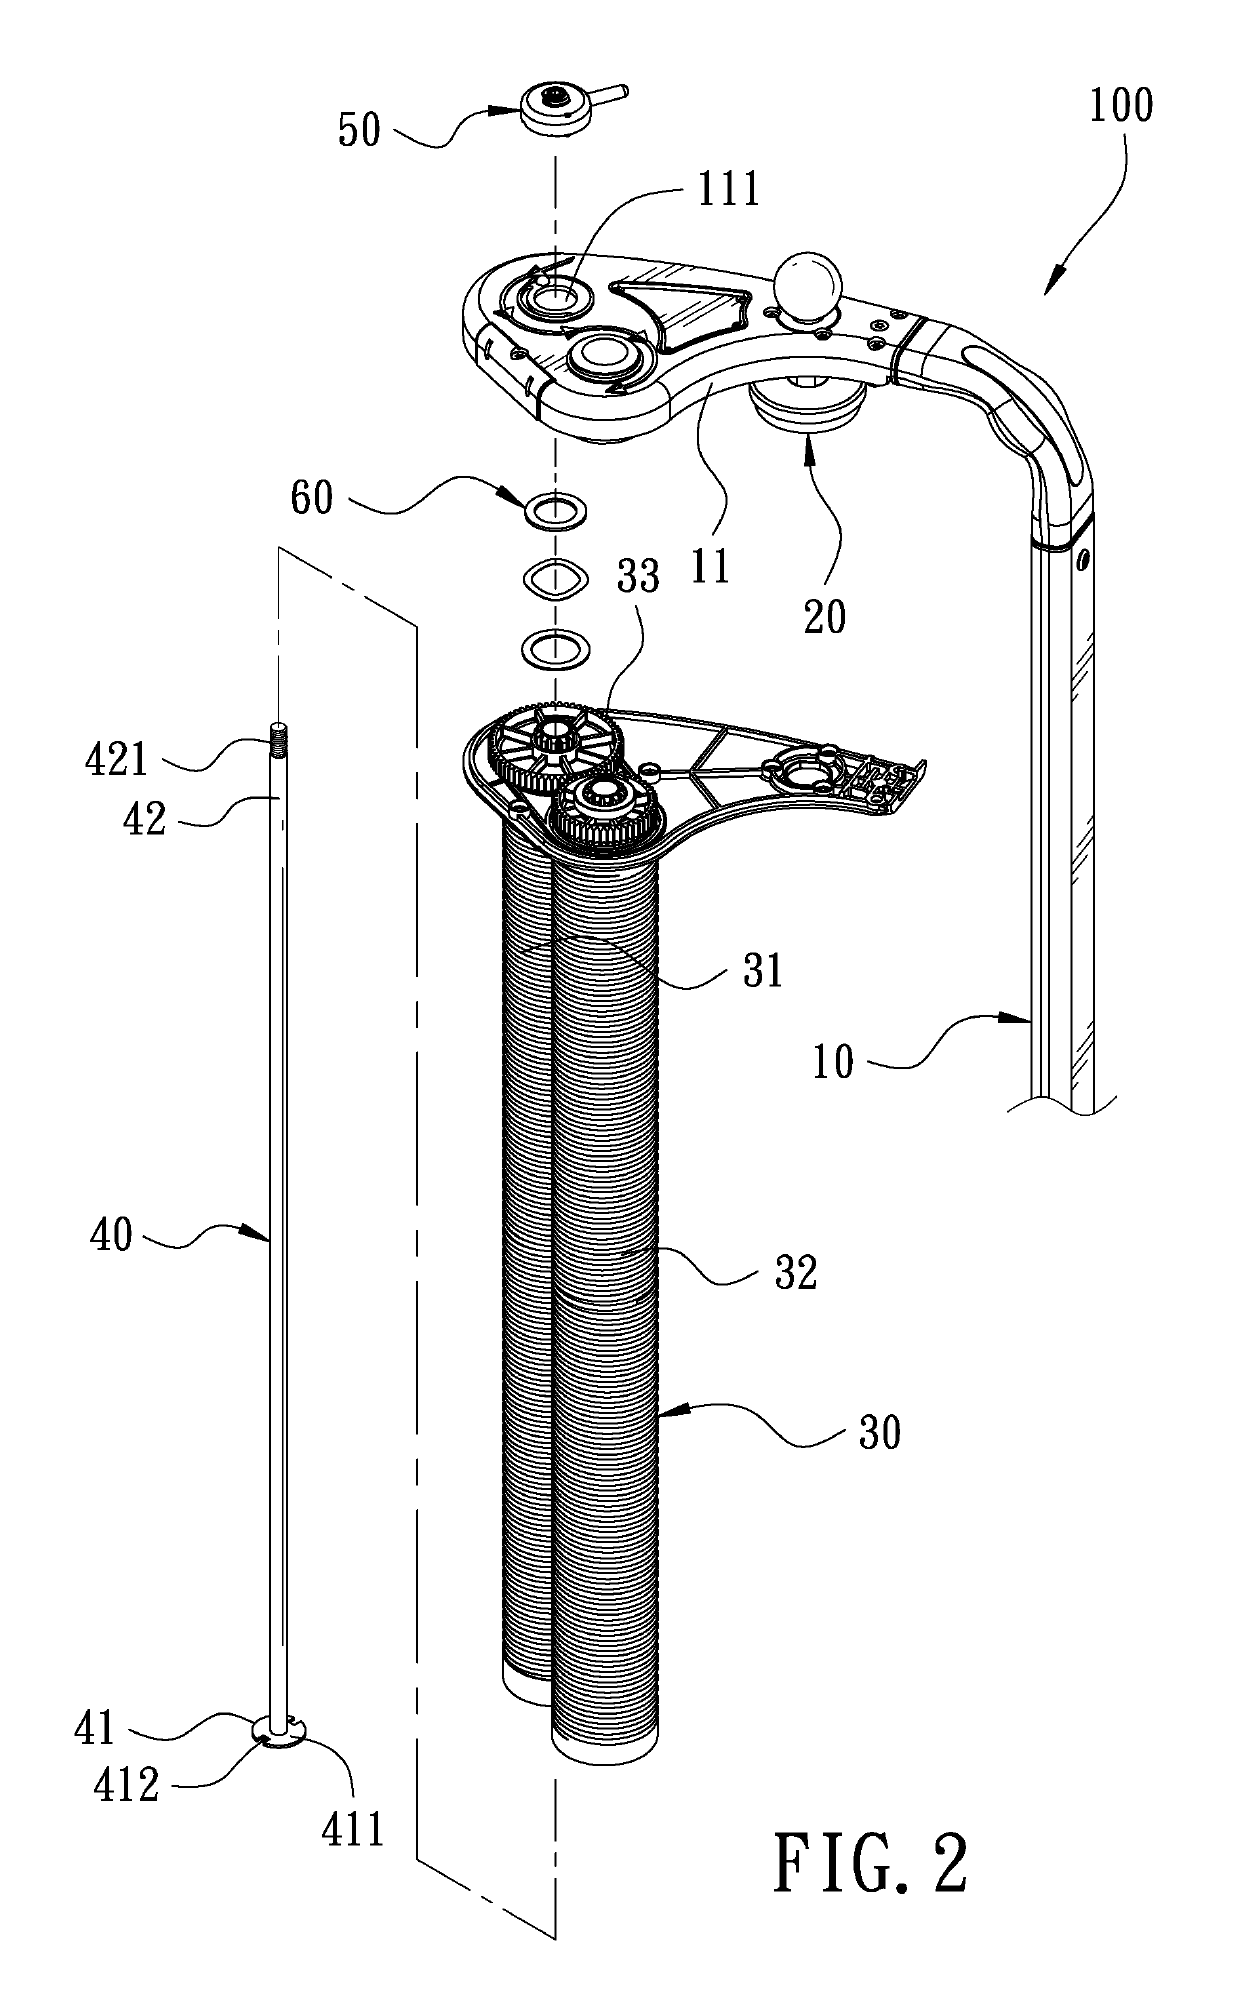 Stretch film dispenser with tension adjustment device